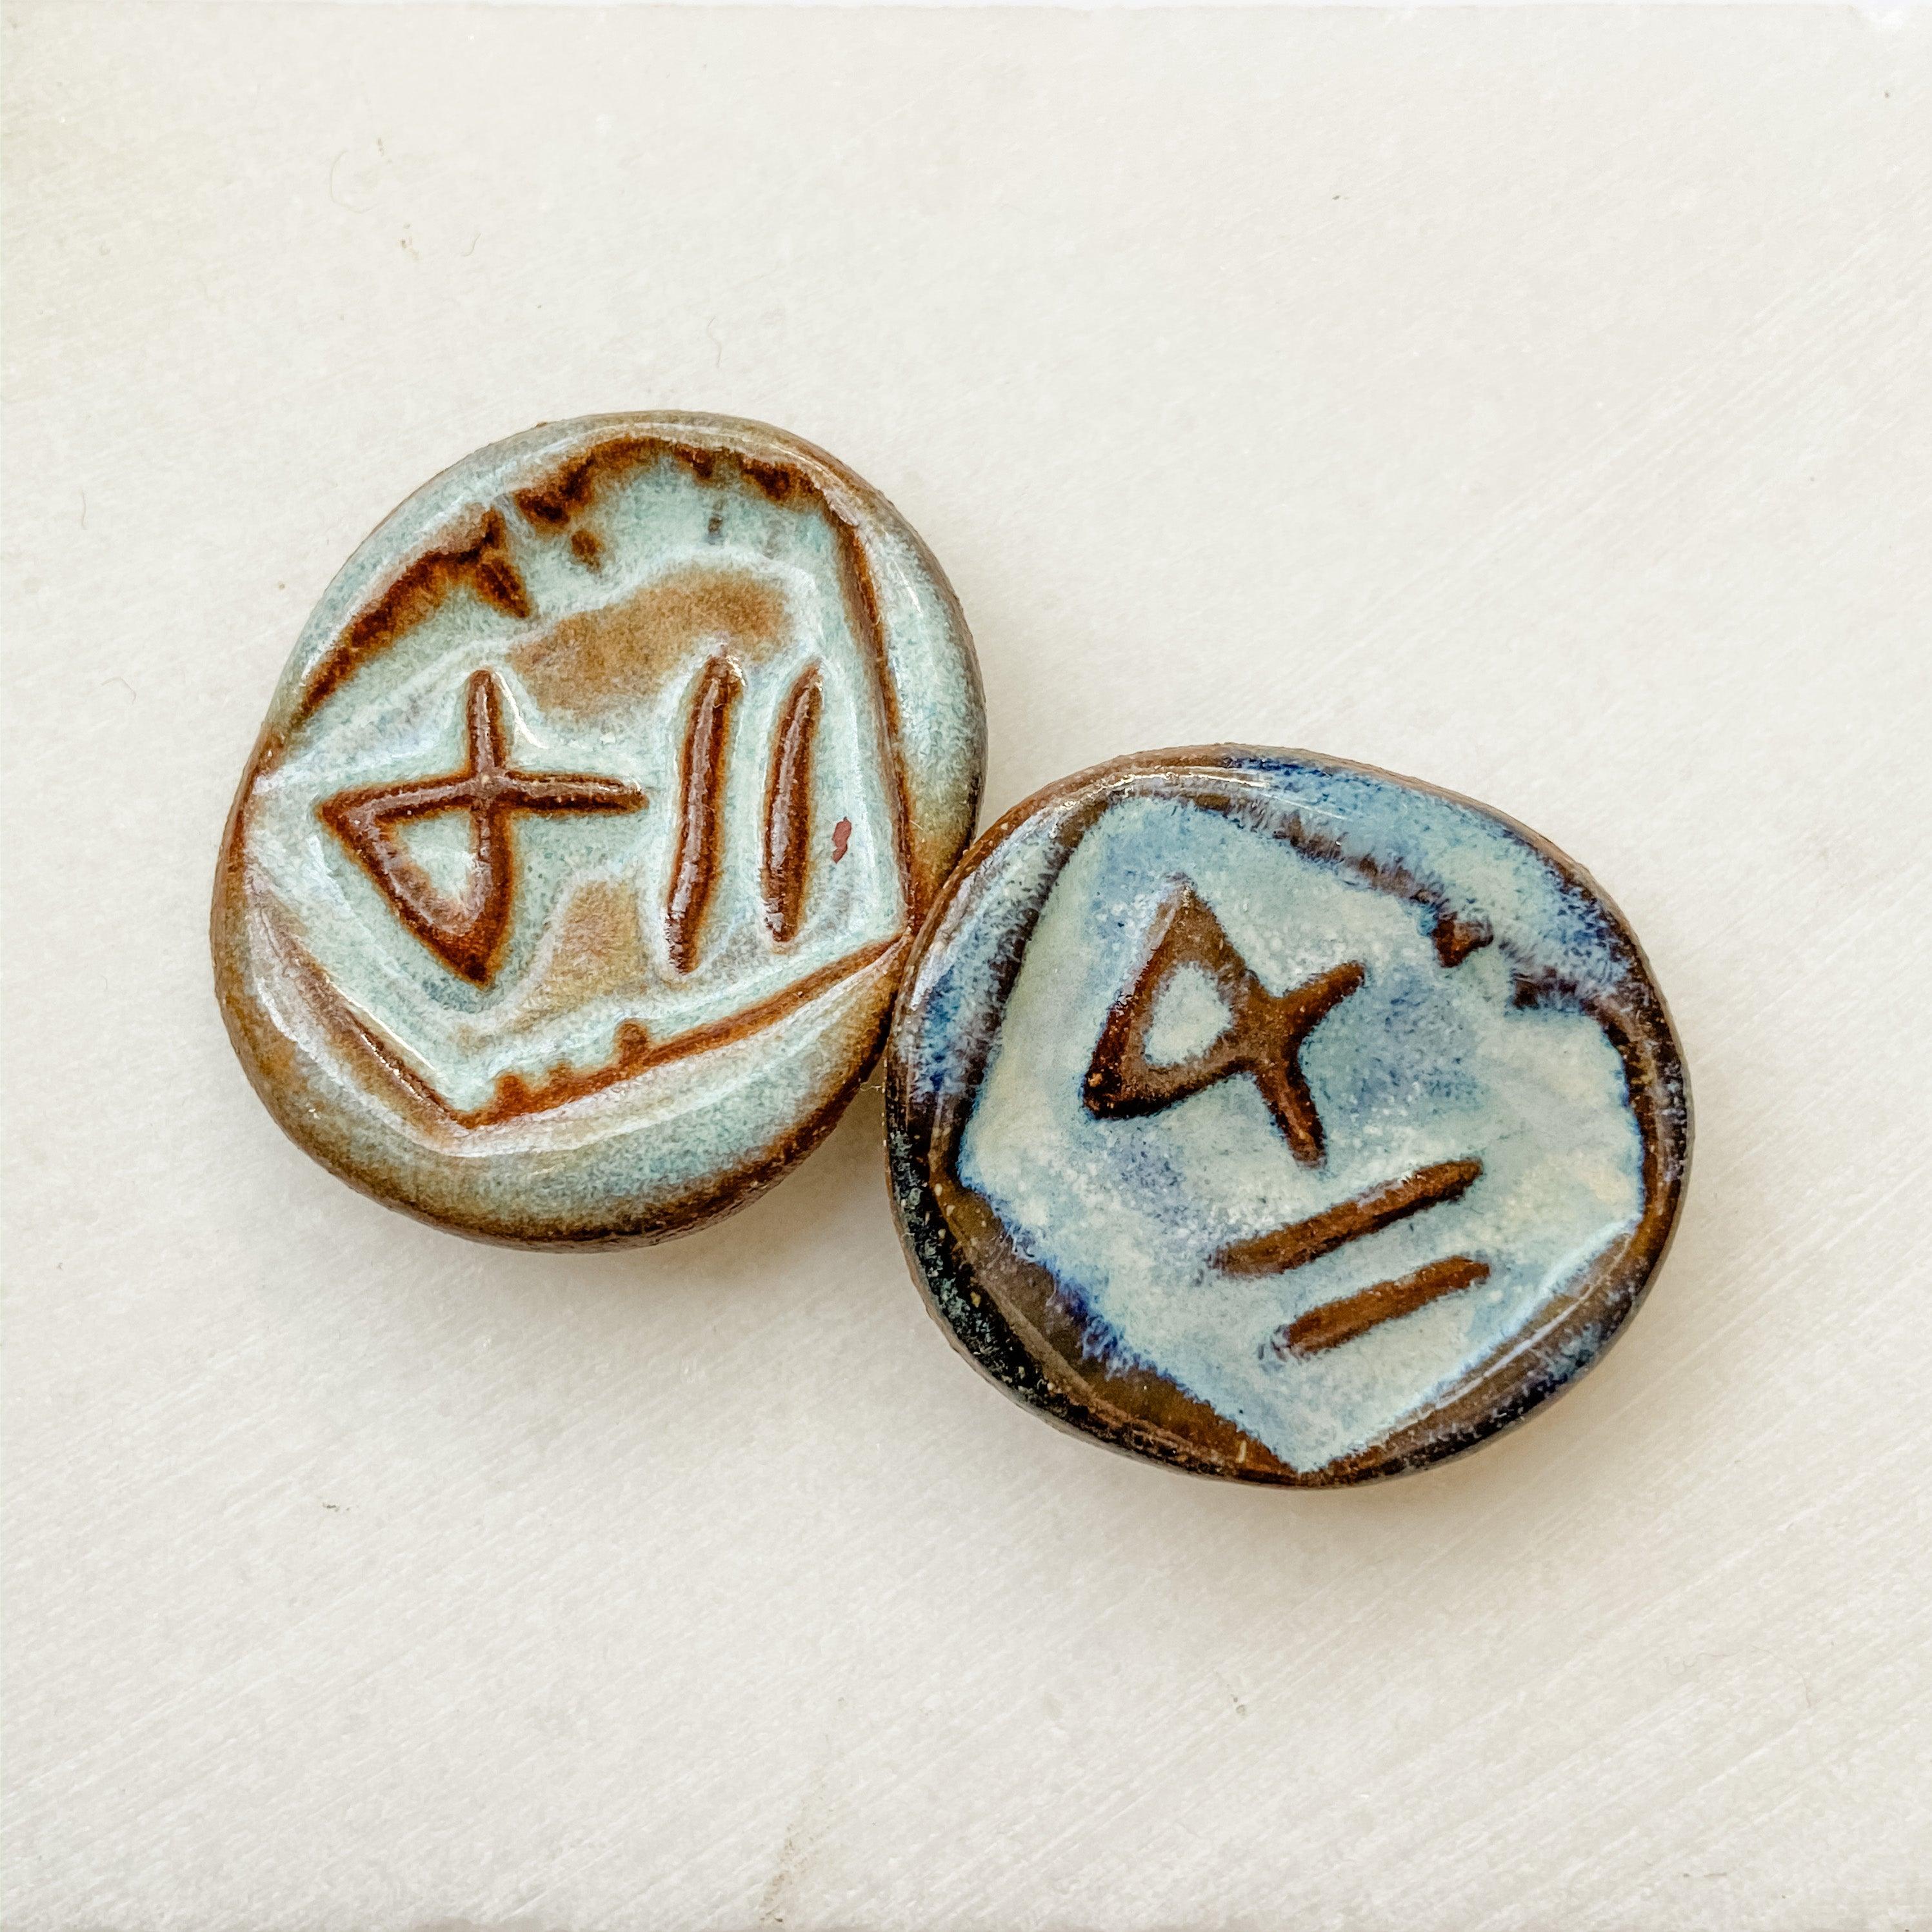 For Equality - Reminder Stones, Worry Stone Uni-T Small Gifts